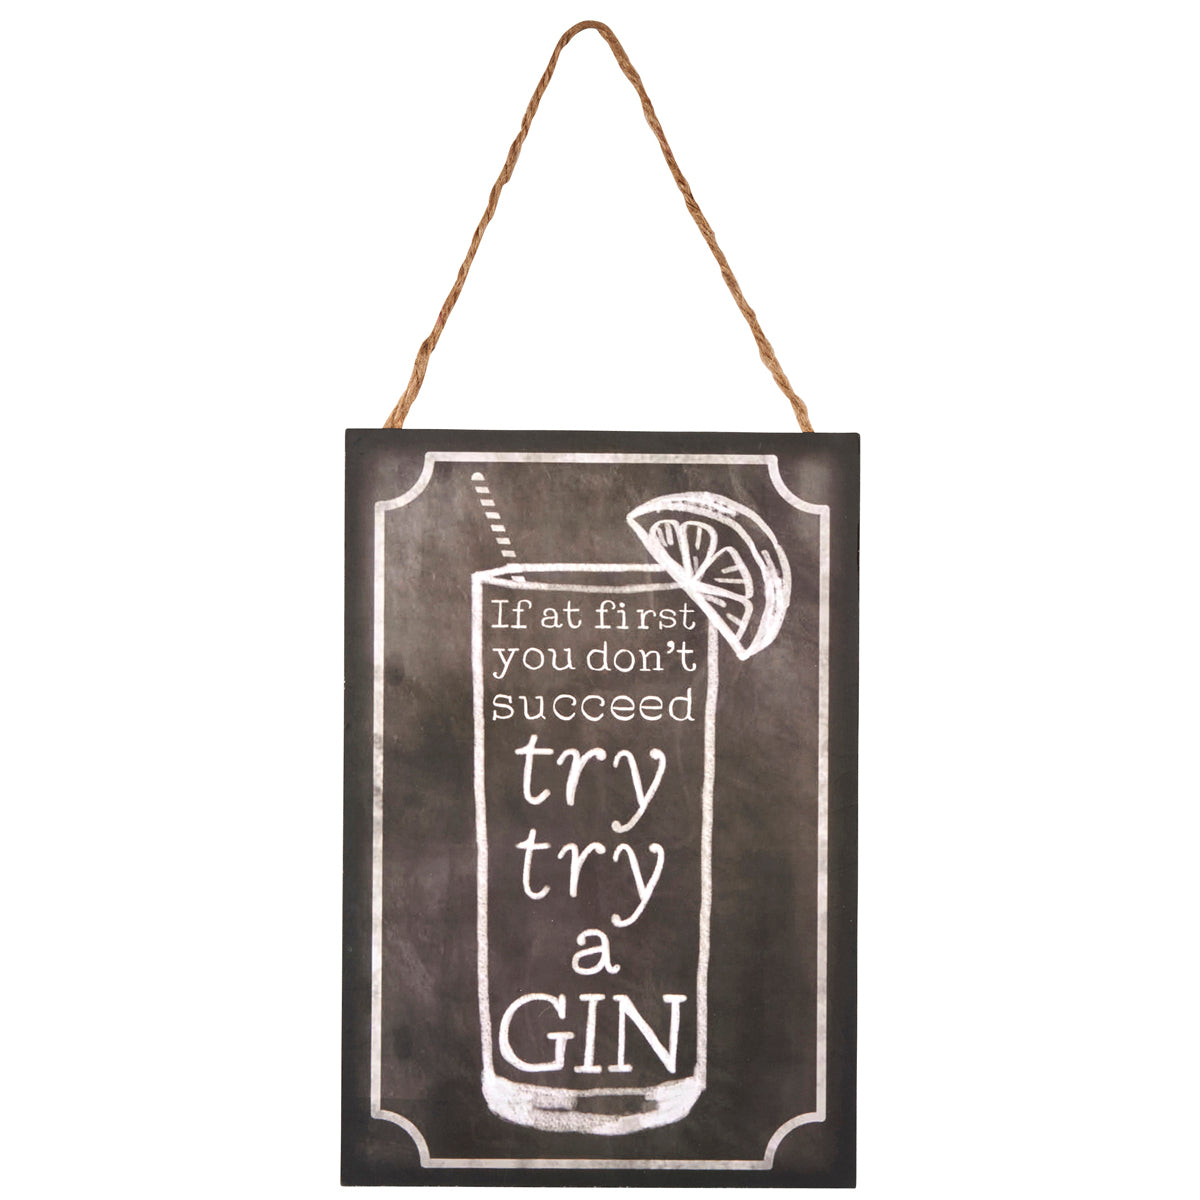 Wooden sign with chalkboard look and includes slogan: If at first you don't succeed try, try a gin